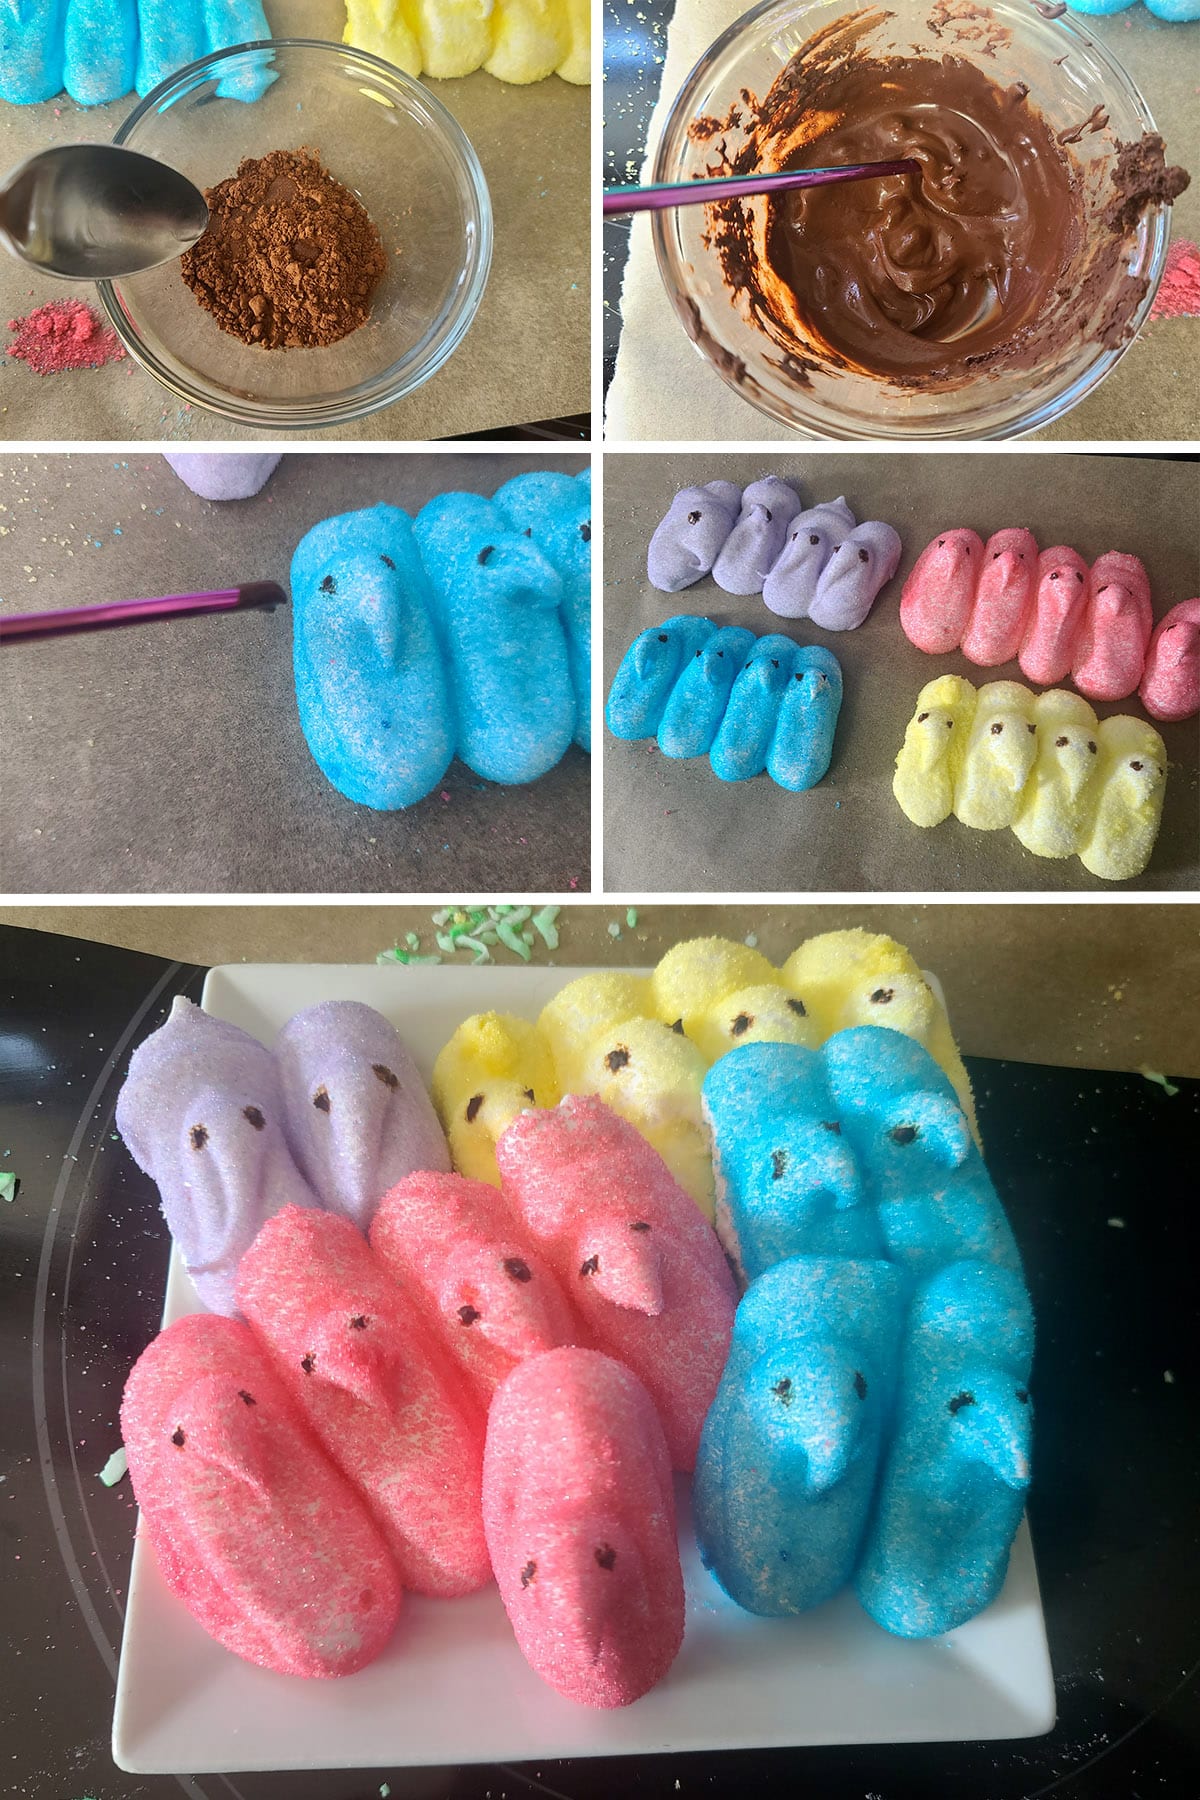 A 5 part image showing cocoa powder being mixed with water and dotted on each peep as eyes.